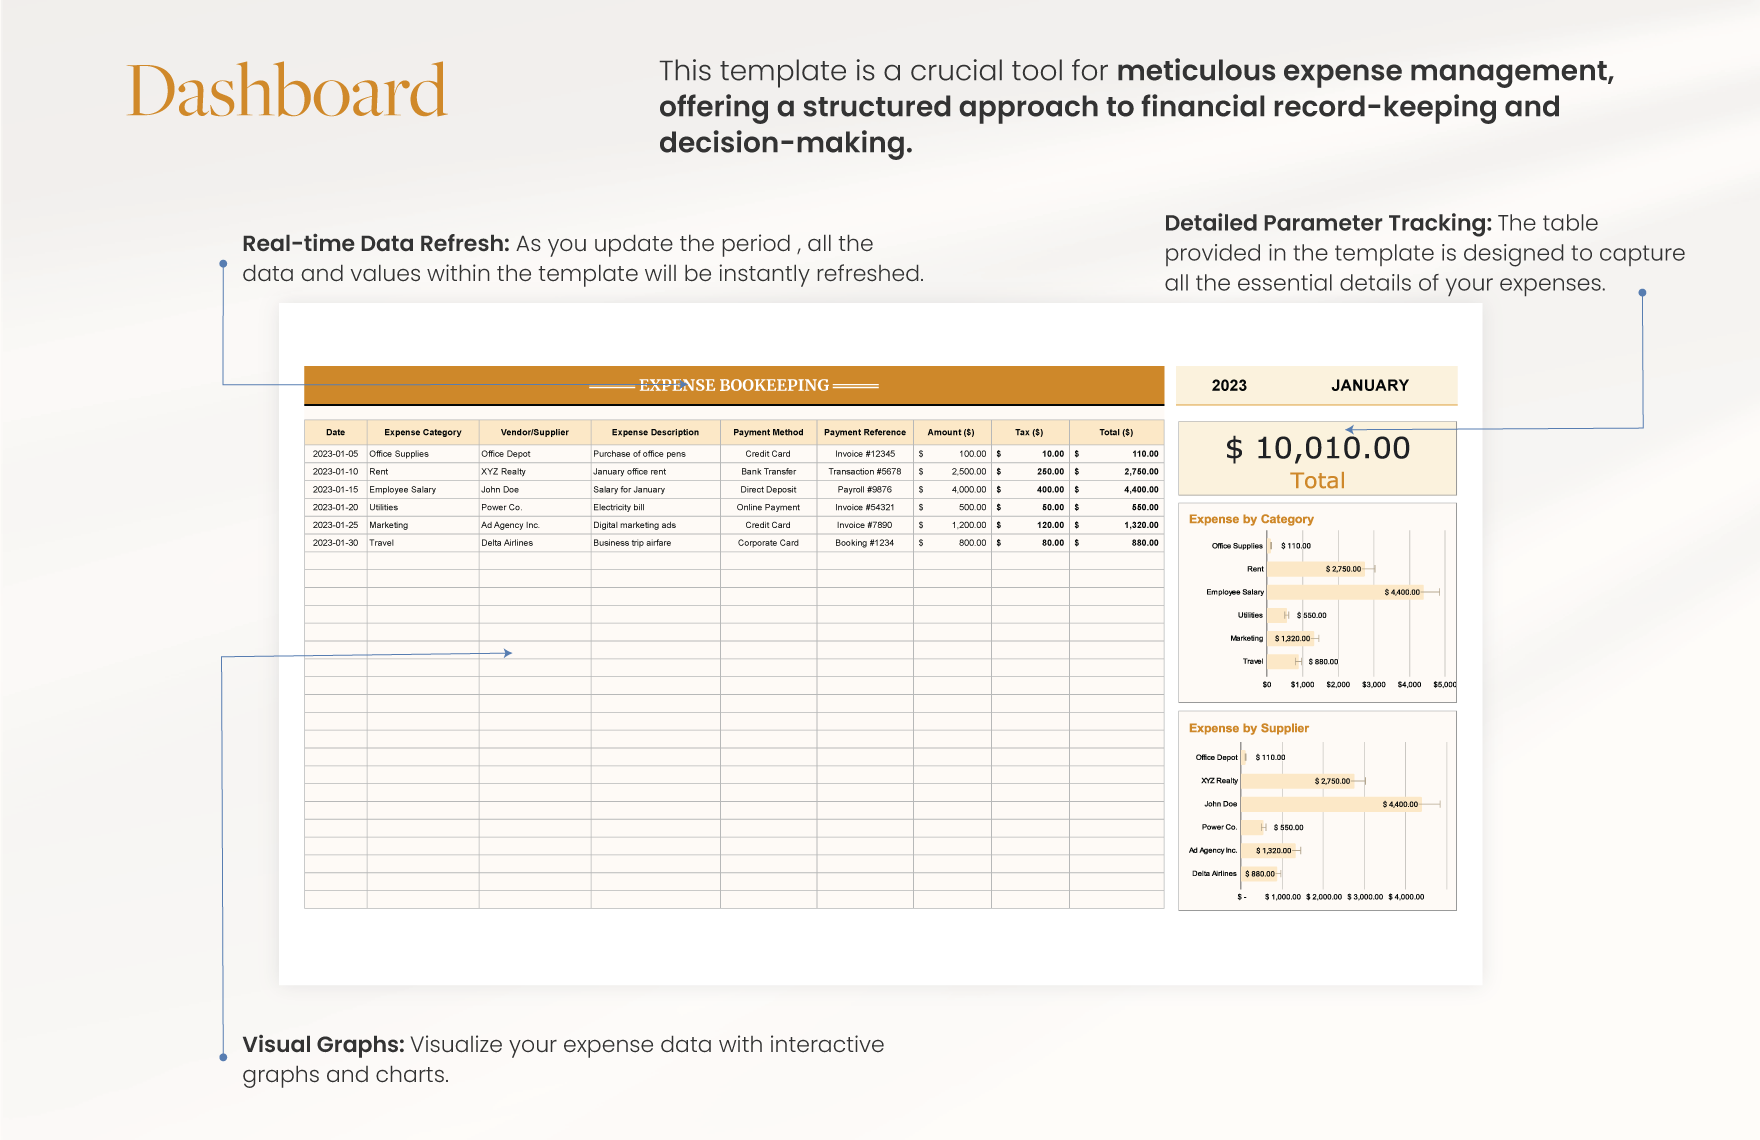 Expense Bookkeeping Template